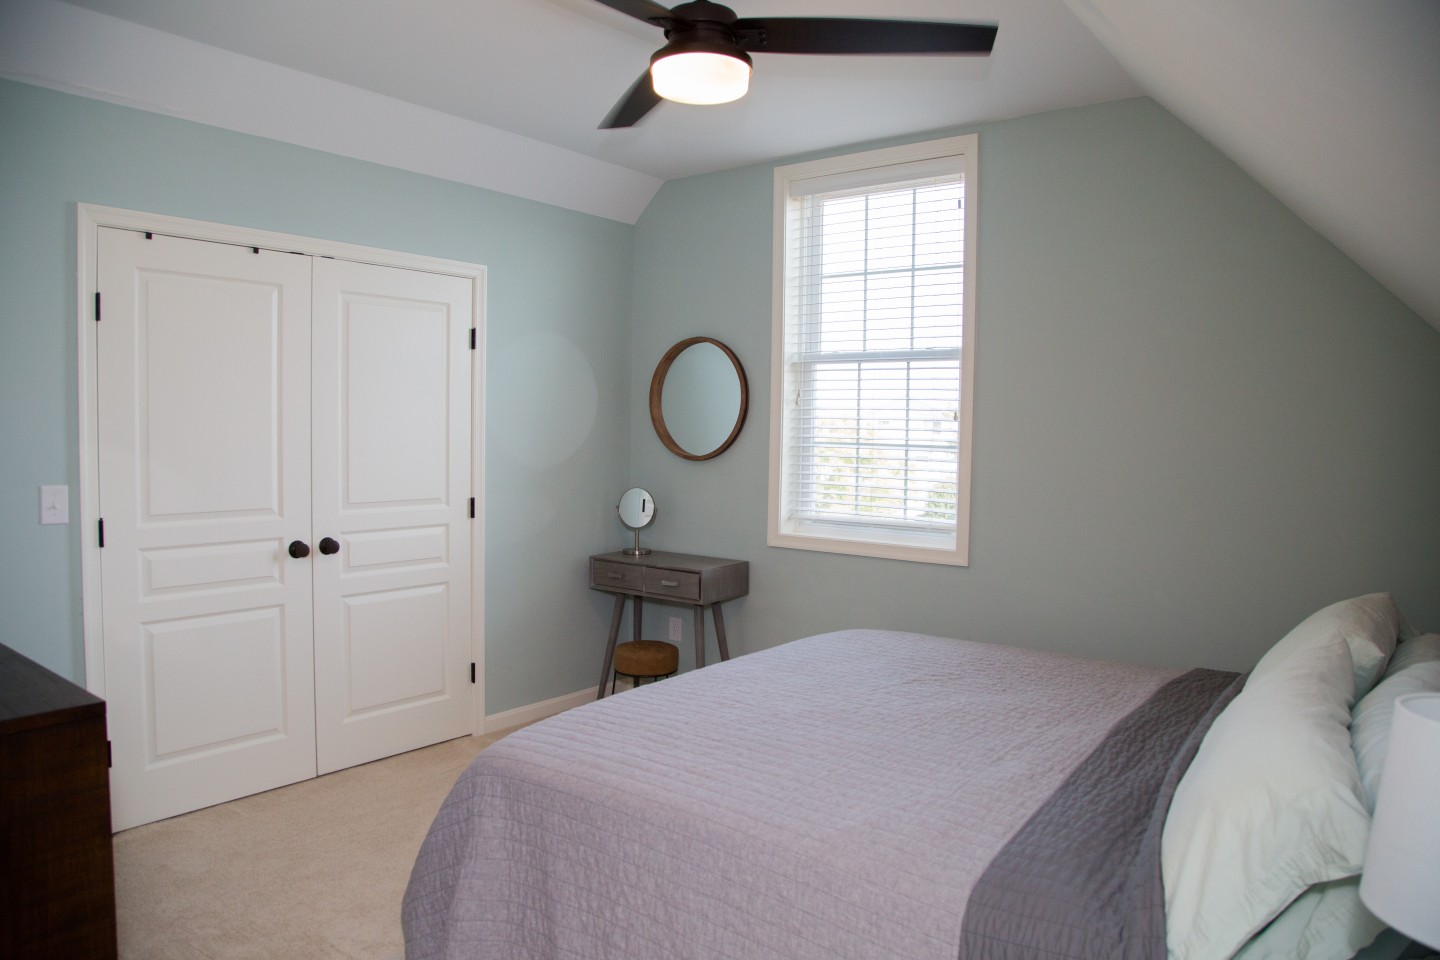 Guest Bedroom with White Closet and Ceiling Fan